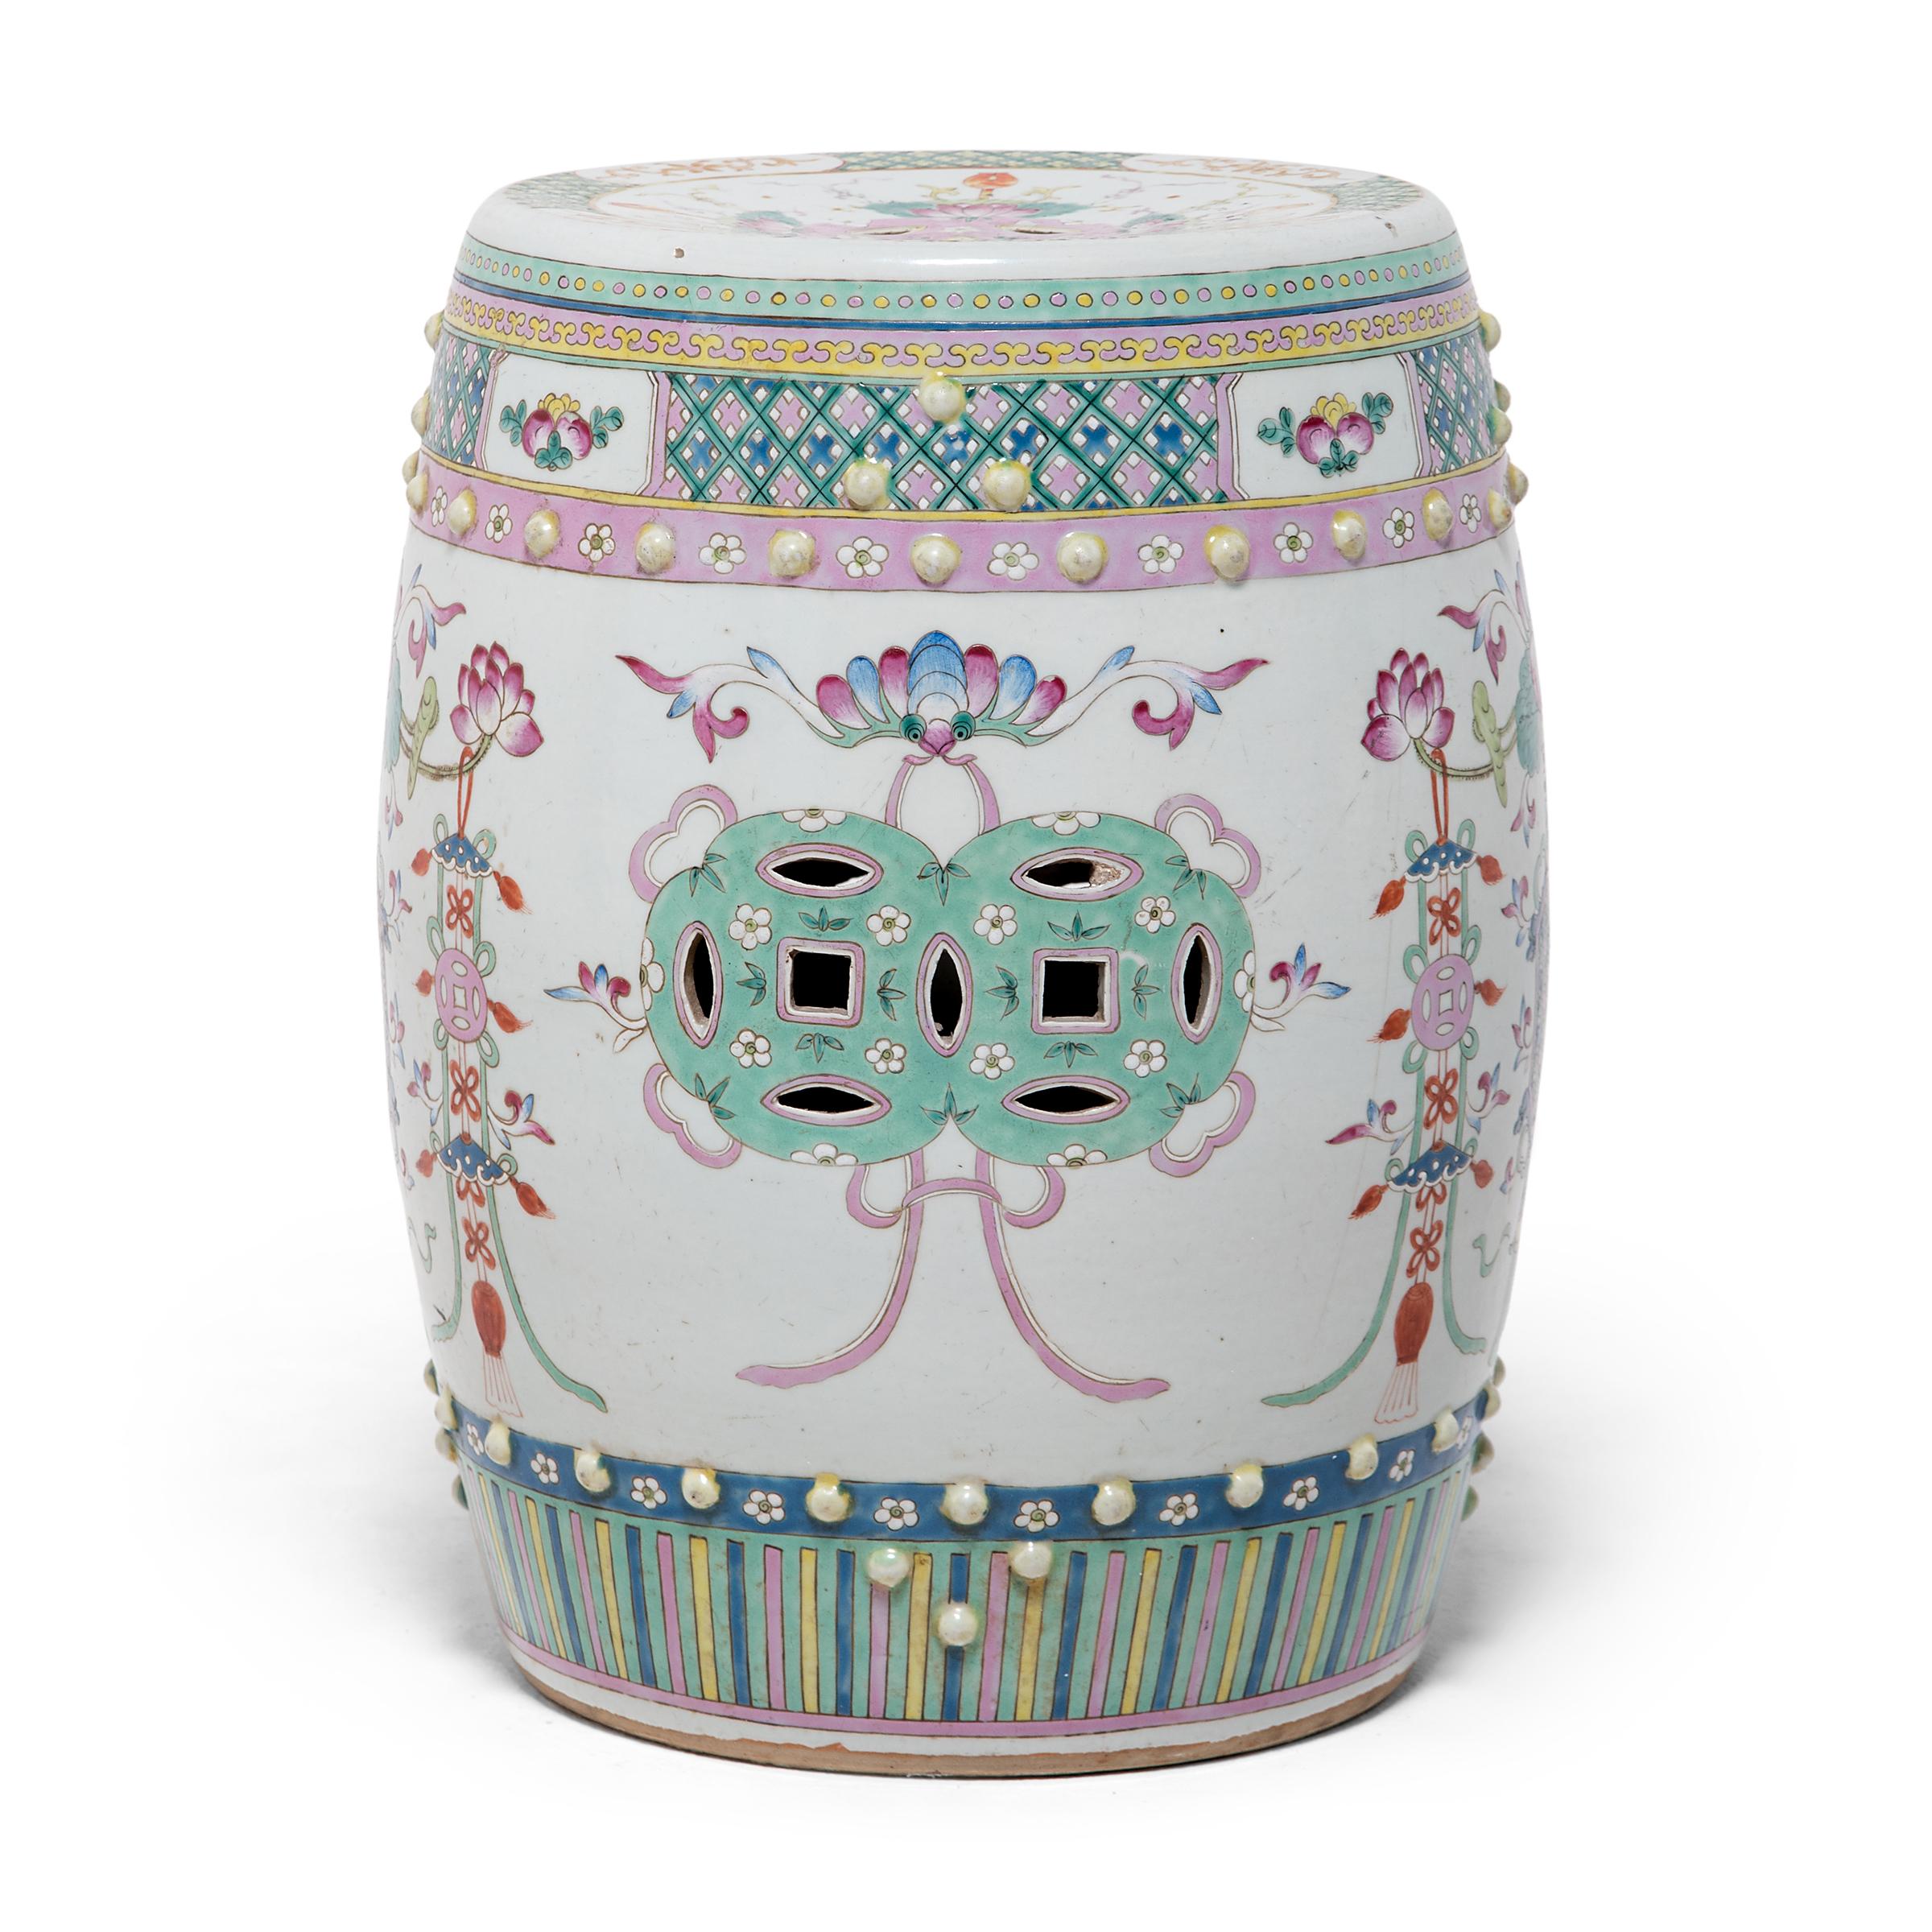 During the 18th century, Europeans provided an eager market for Chinese export porcelain, especially the colorful and fanciful ware known as “famille rose.” Named for a palette of opaque overglaze enamels that favored roses and pinks, famille rose